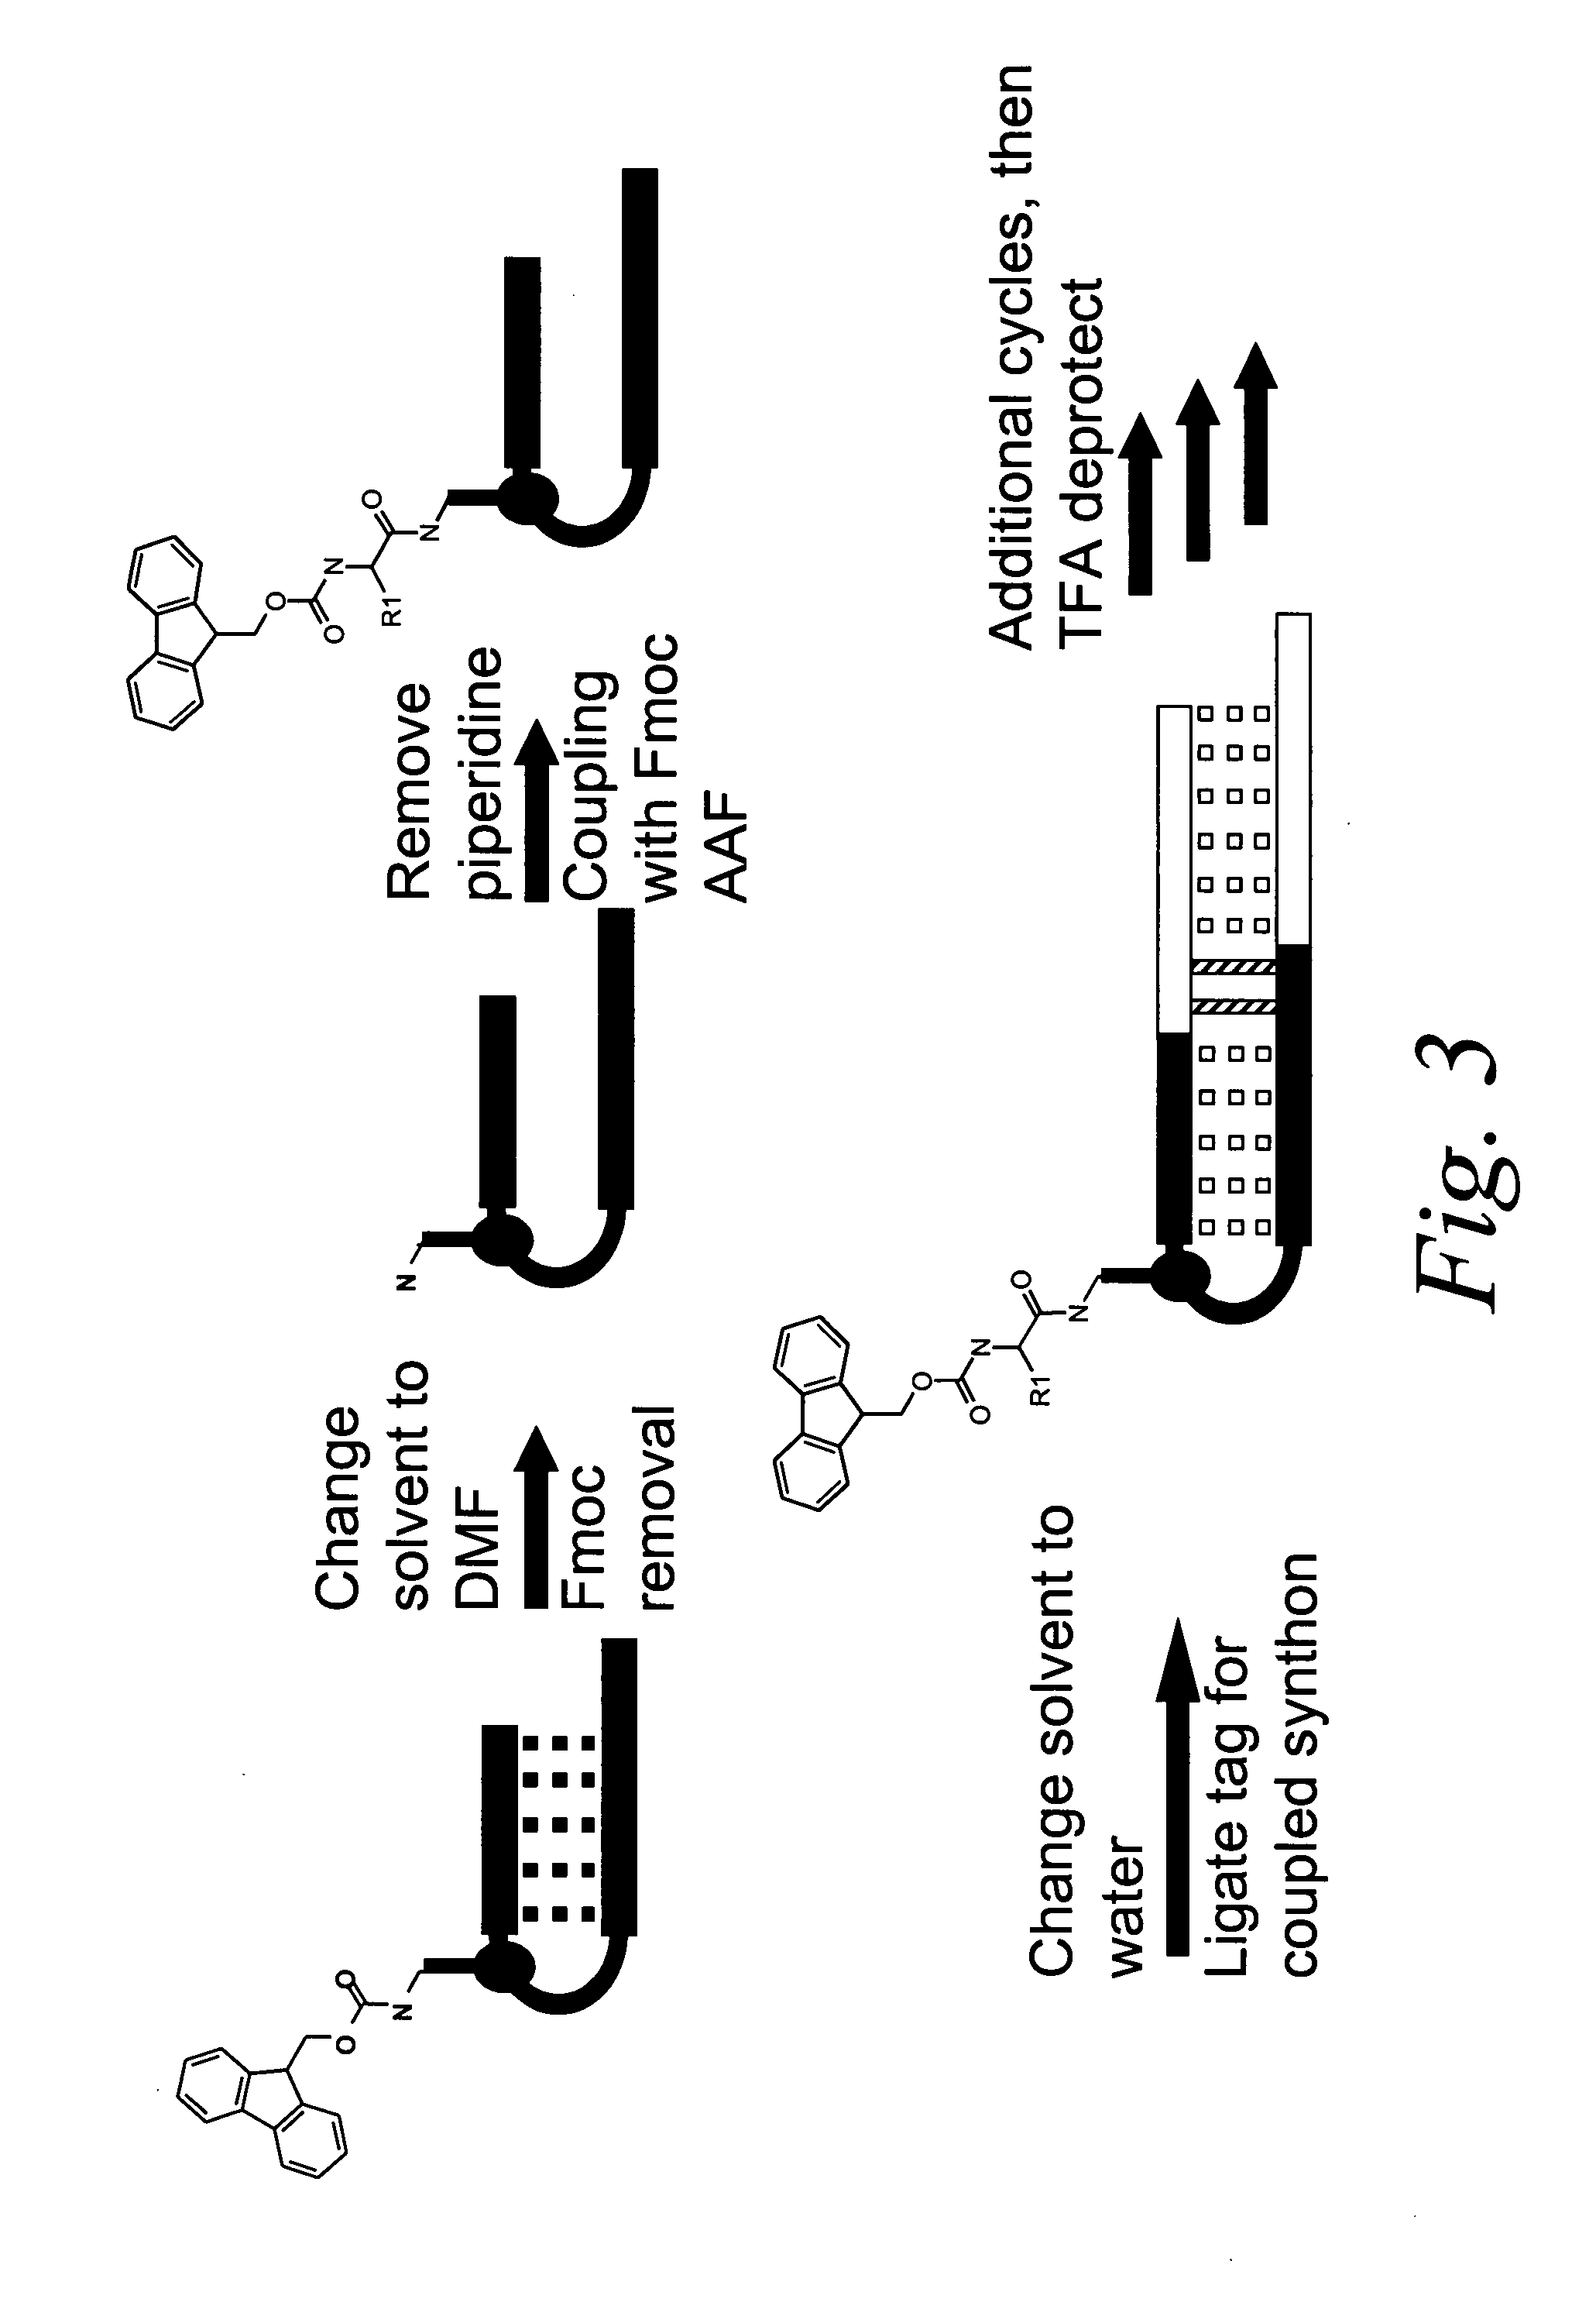 Methods for identifying compounds of interest using encoded libraries